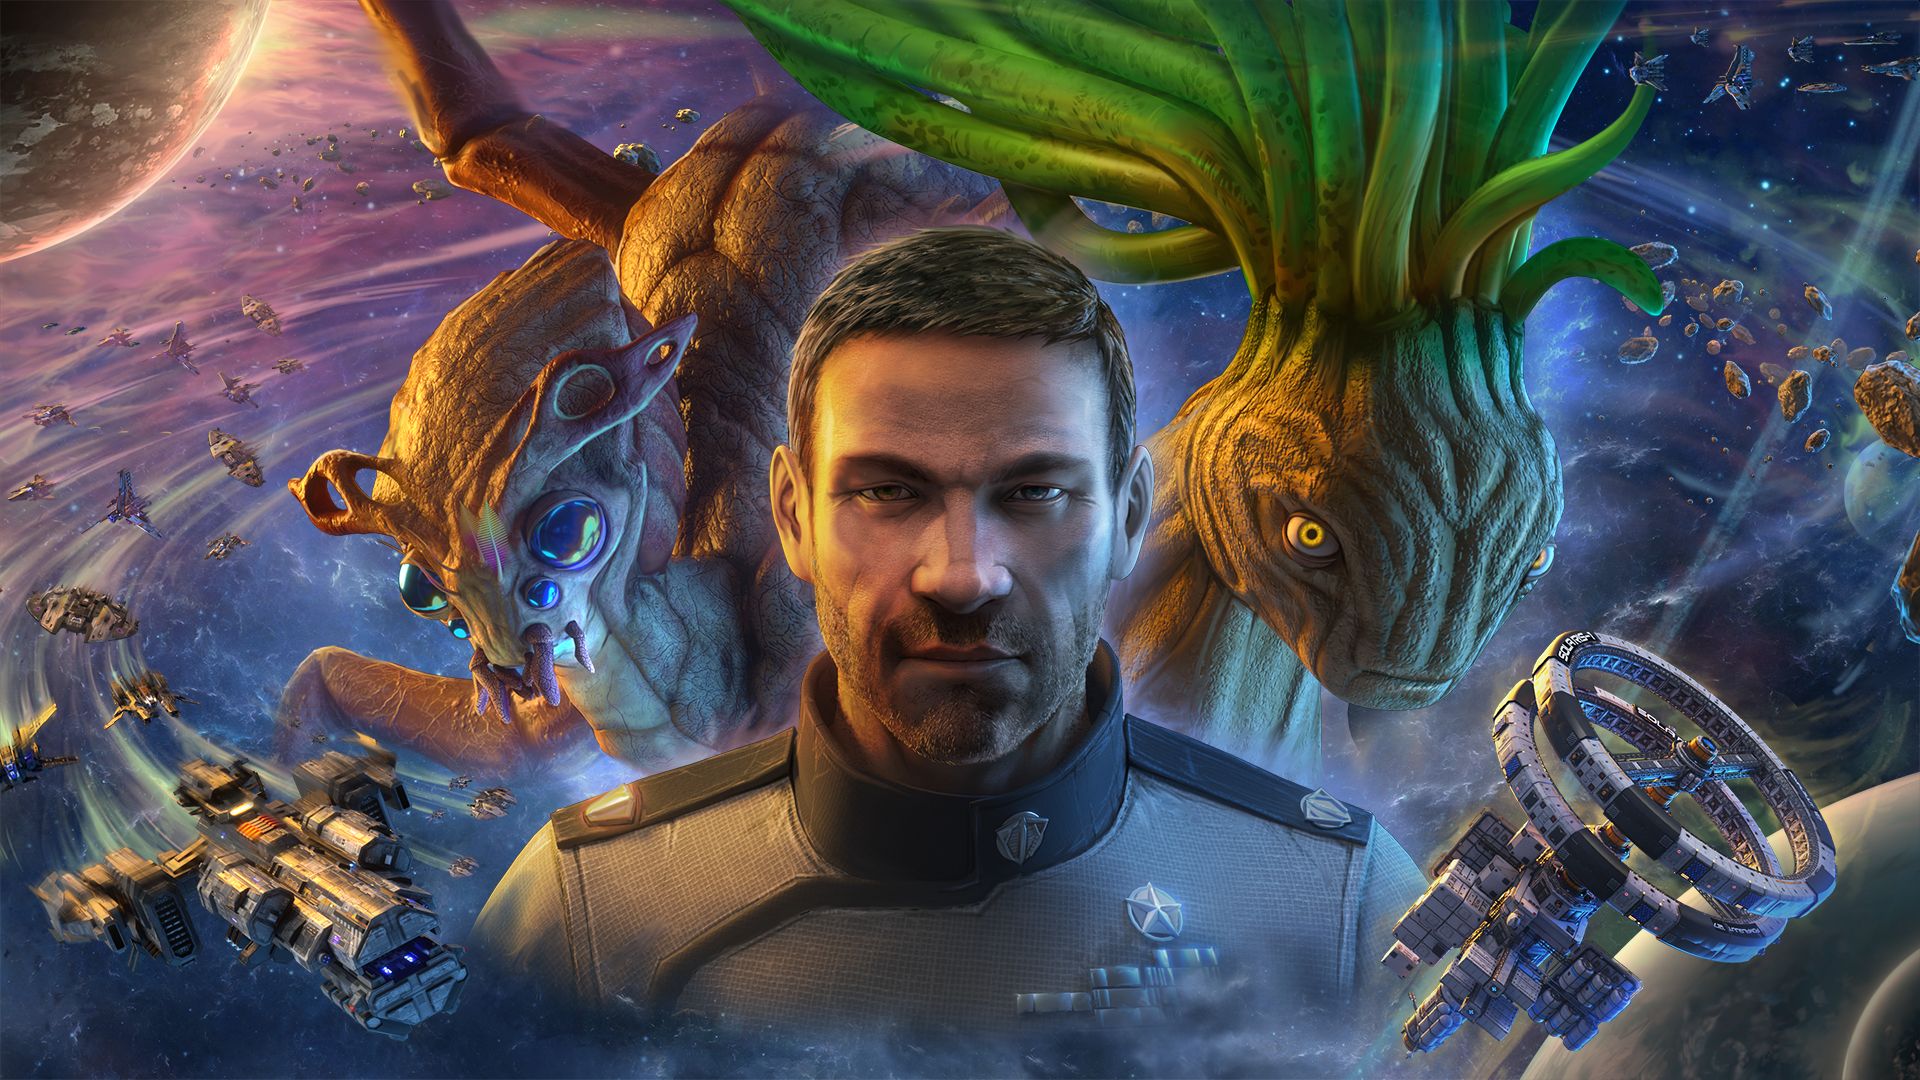 Five reasons to be excited for space 4X game Galactic Civilizations IV